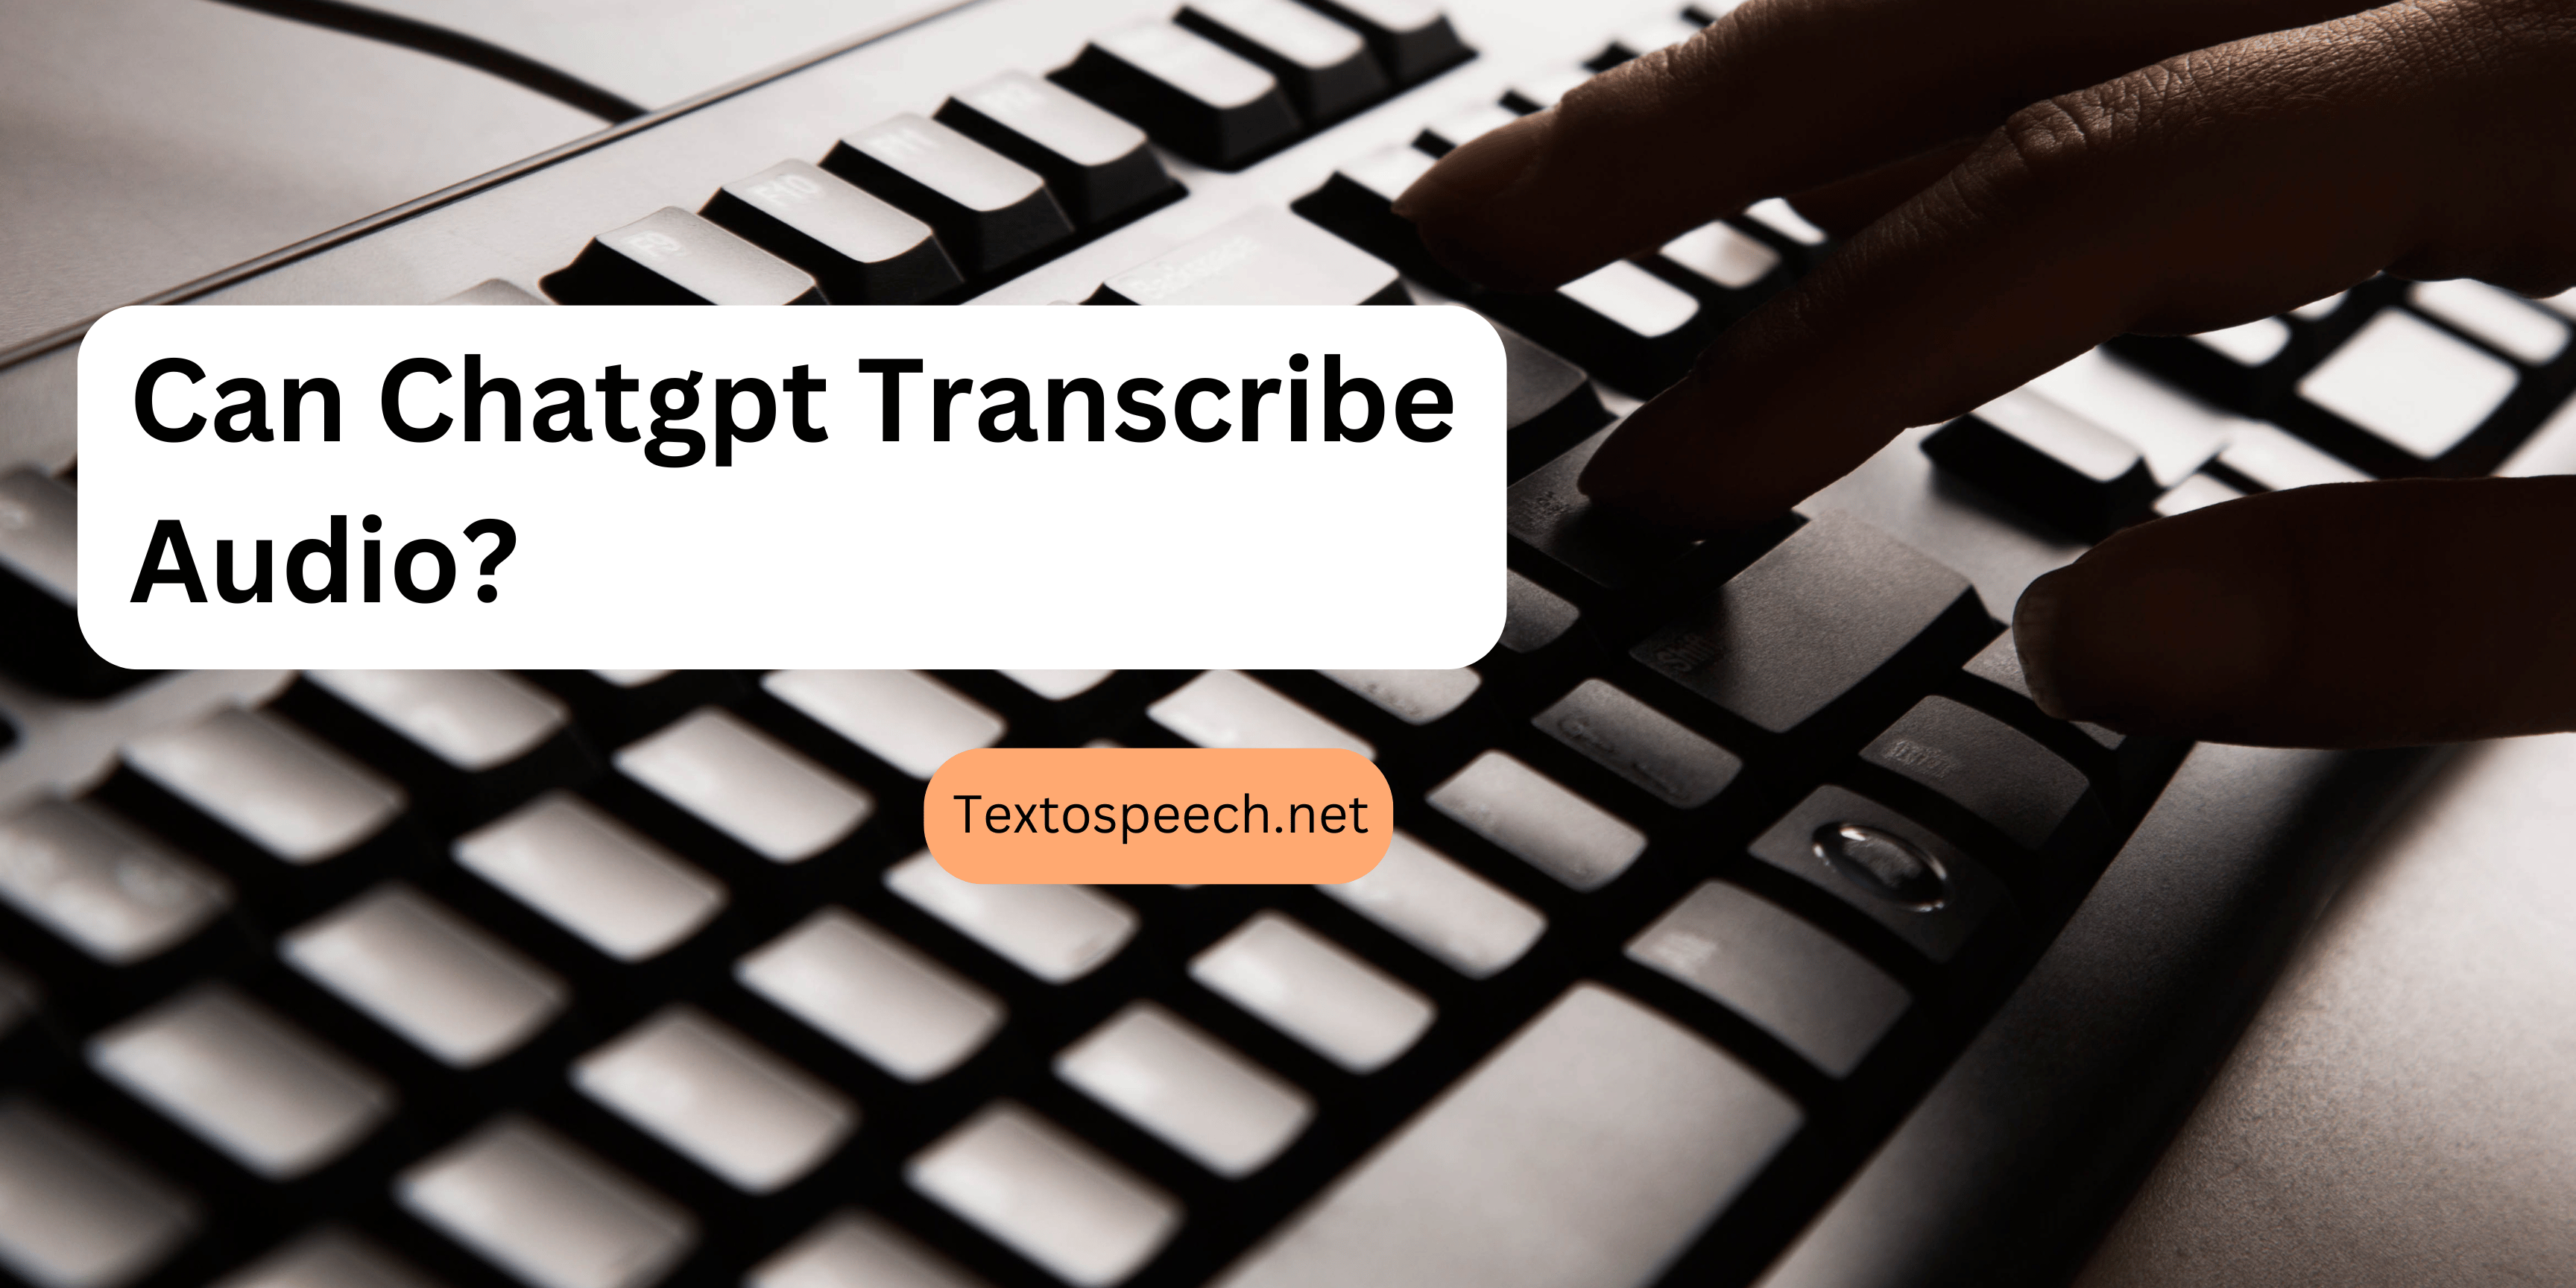 Can Chatgpt Transcribe Audio?